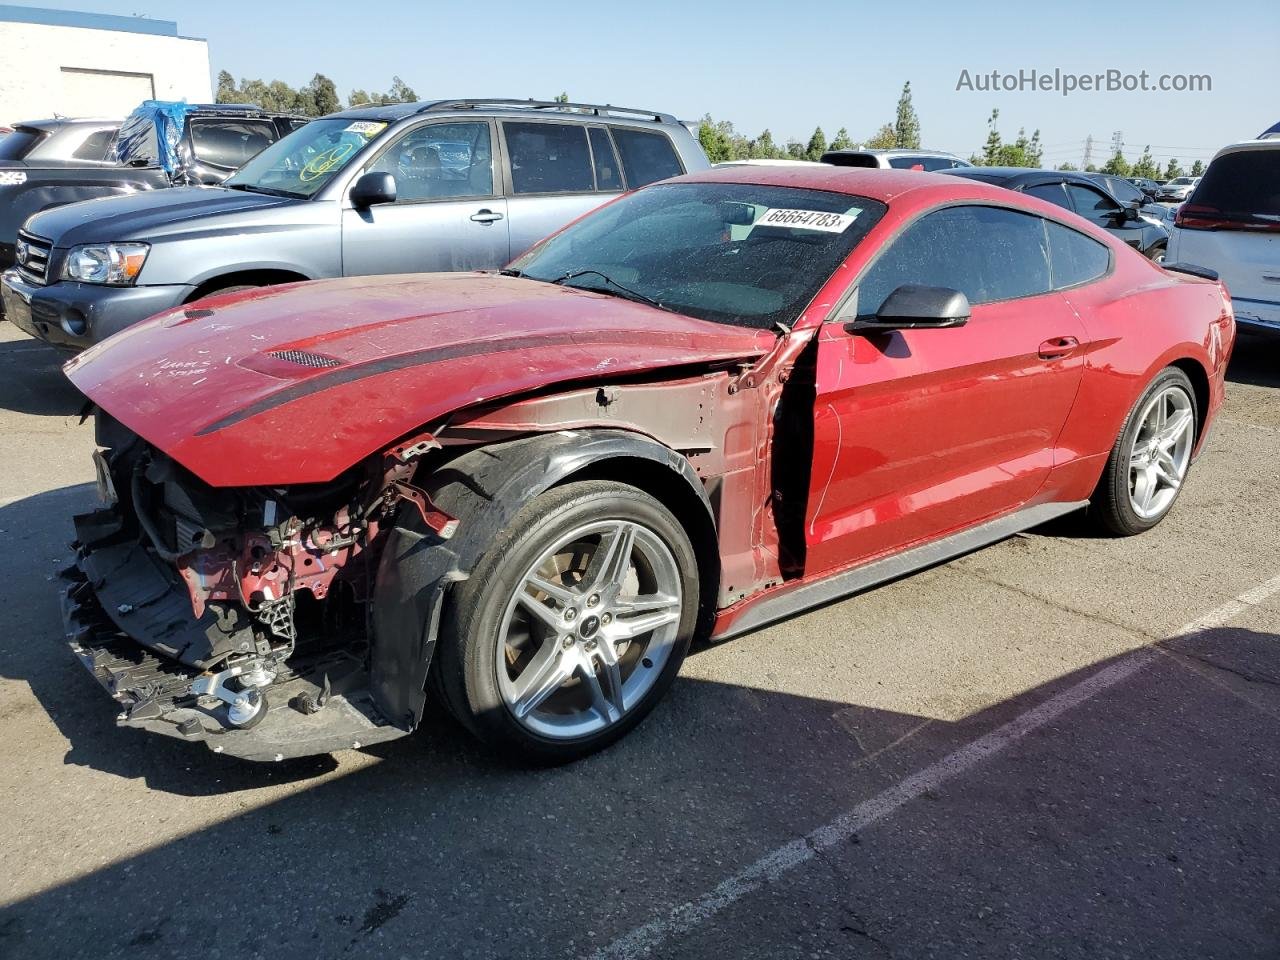 2020 Ford Mustang  Red vin: 1FA6P8TD1L5182825